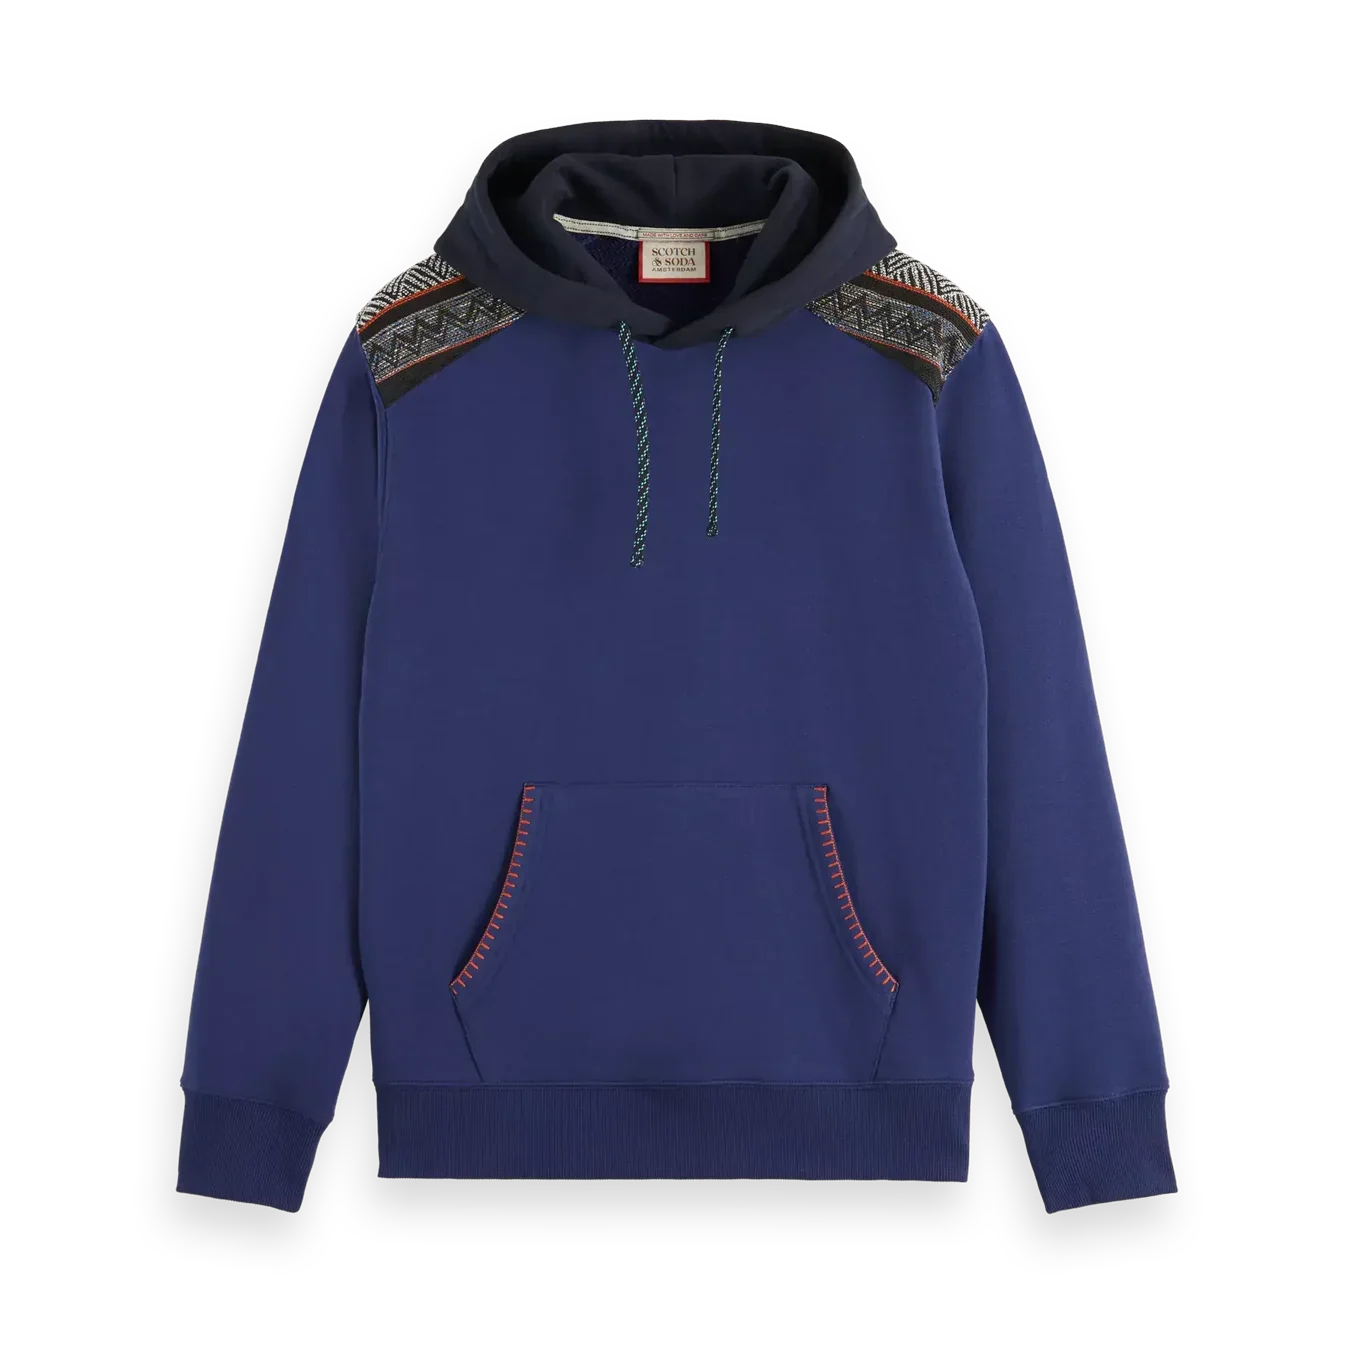 'Scotch & Soda Mixed Fabric Hoodie w/ Textured Shoulders' in 'Denim Blue' colour